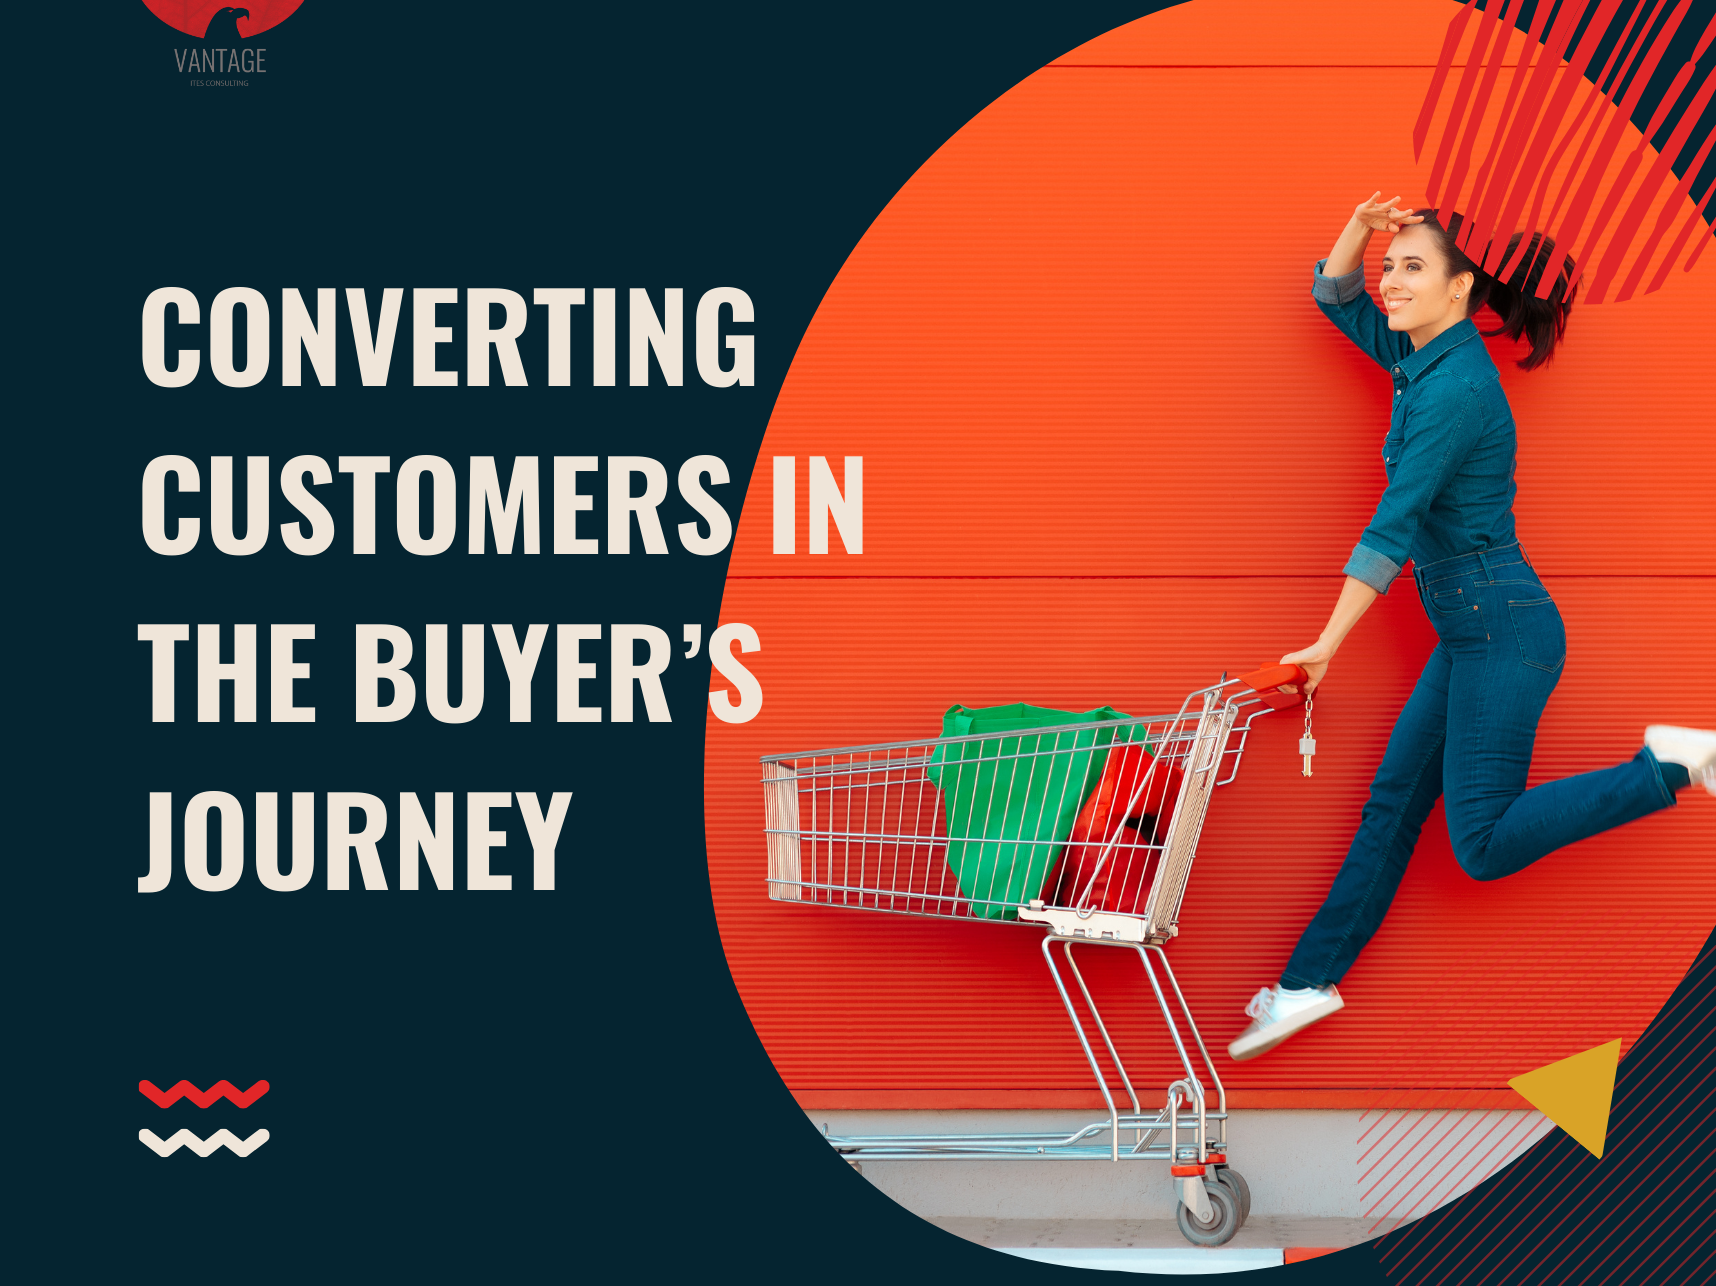 Why is the buyer's journey important?